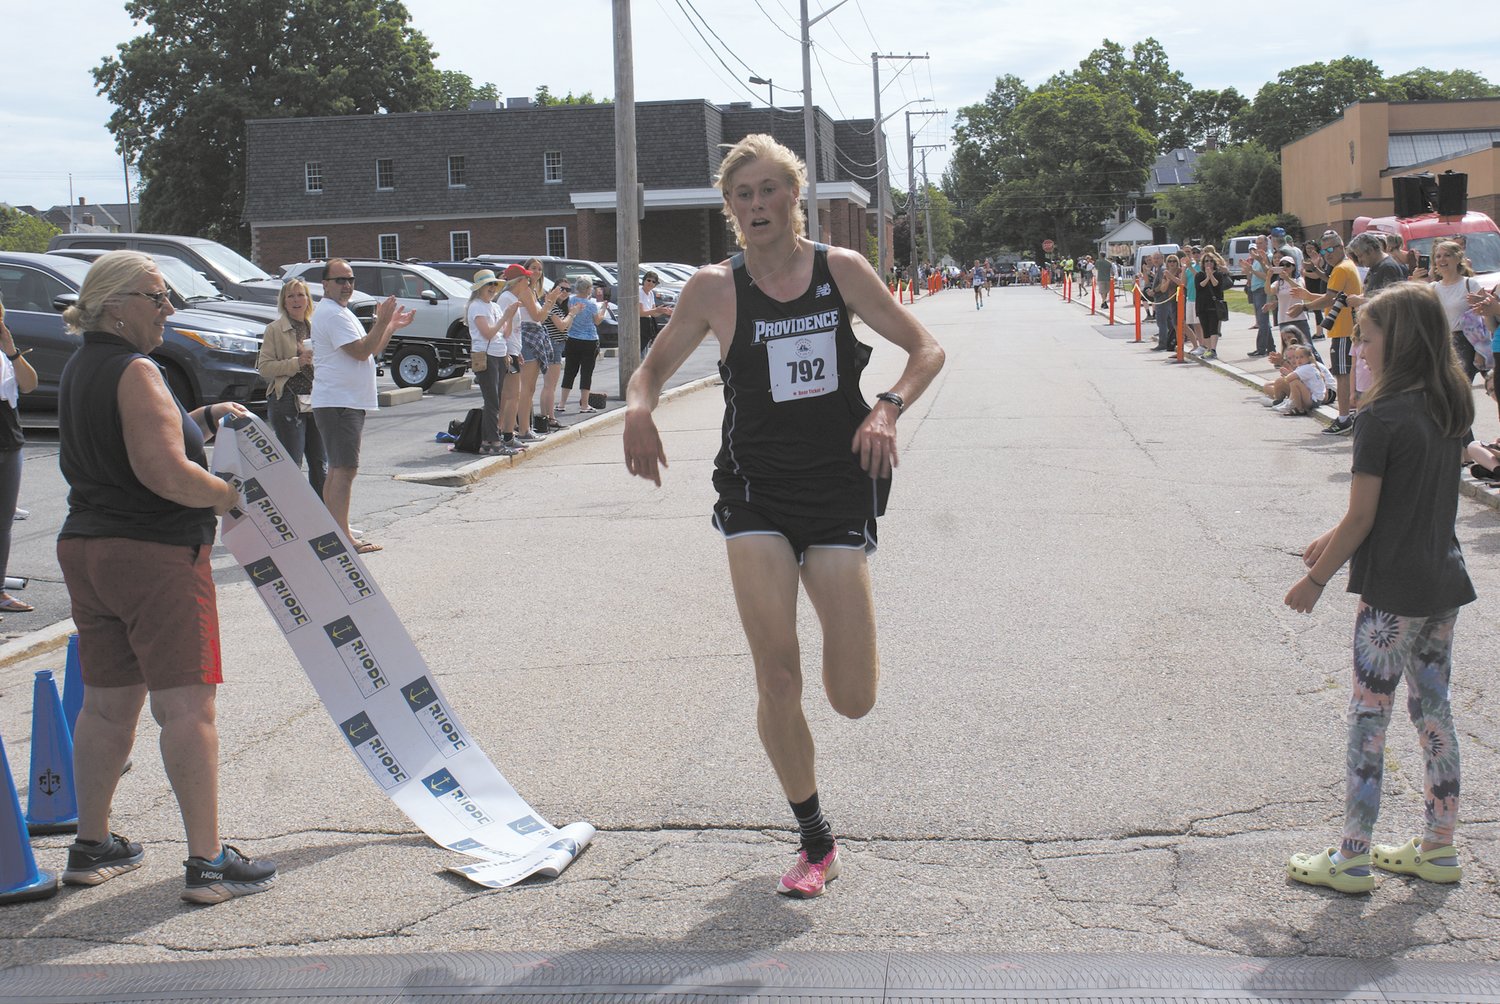 CROSSING THE FINISH LINE: Providence College sophomore Liam Back finished in first place with a time of 14:38. (Photo by Steve Popiel)